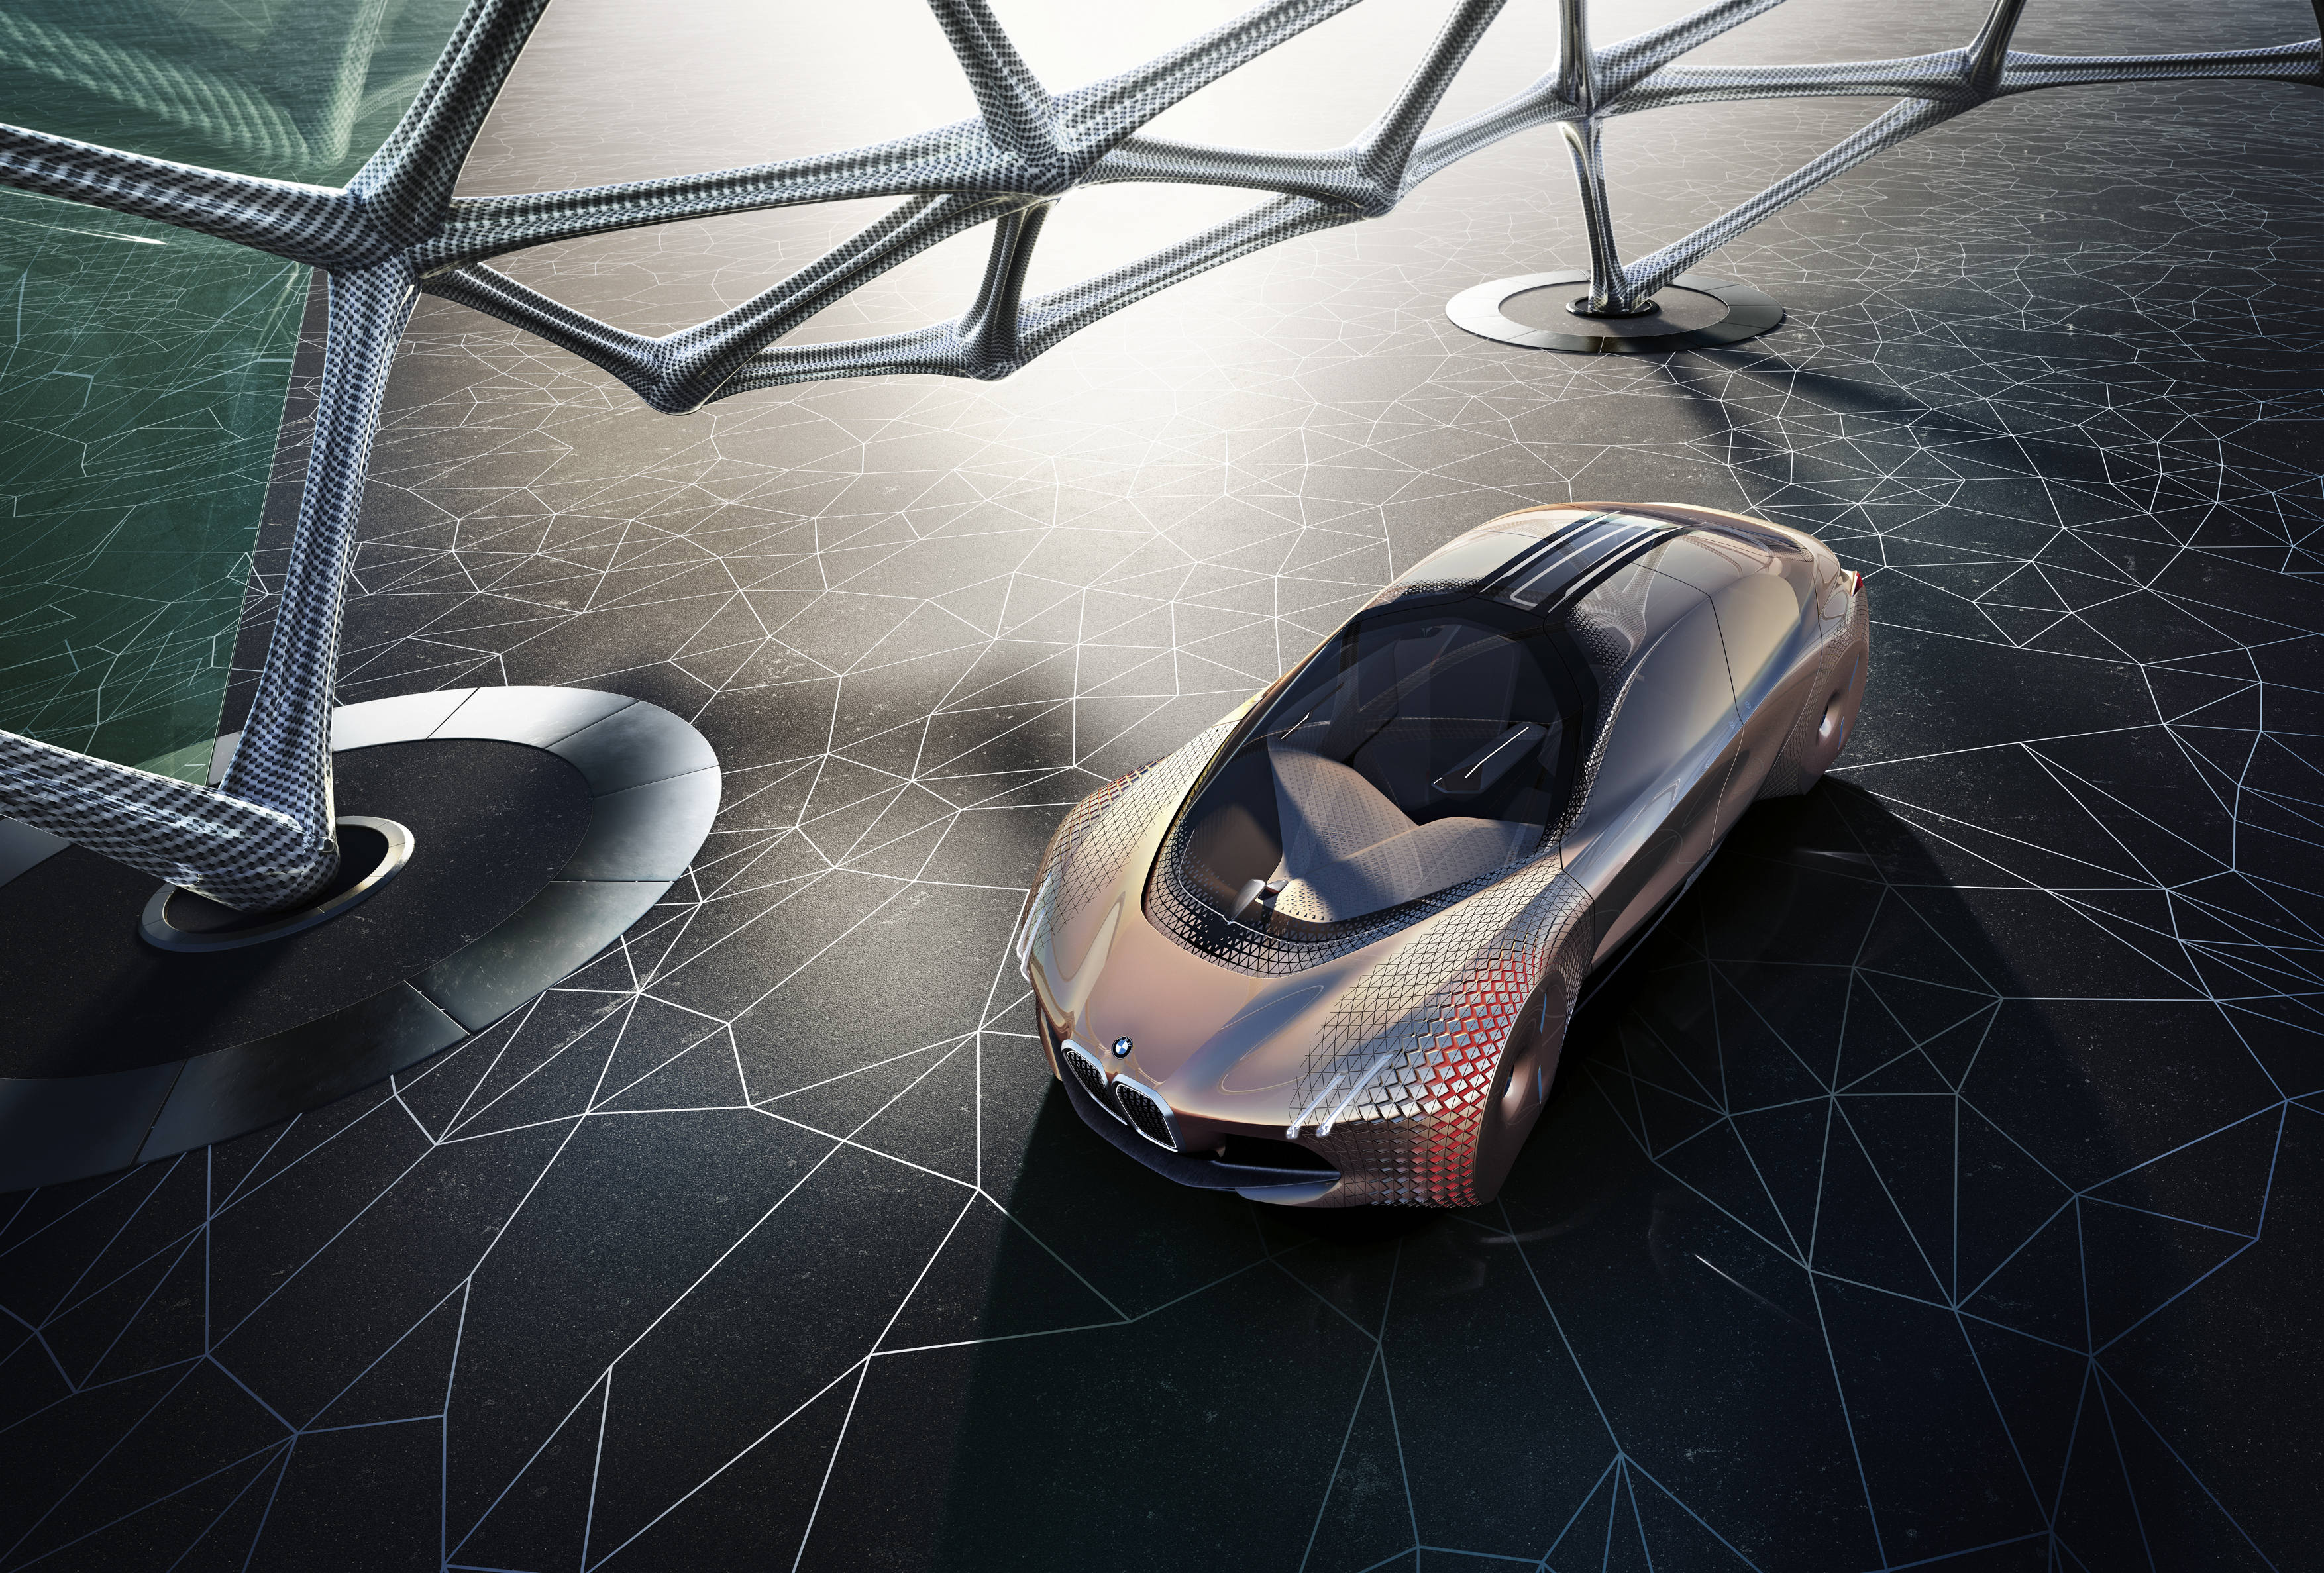 BMW Vision Next 100 BMW Car Concept Cars Futuristic Abstract High Angle Geometry Brown Cars Beige Sp 3508x2375